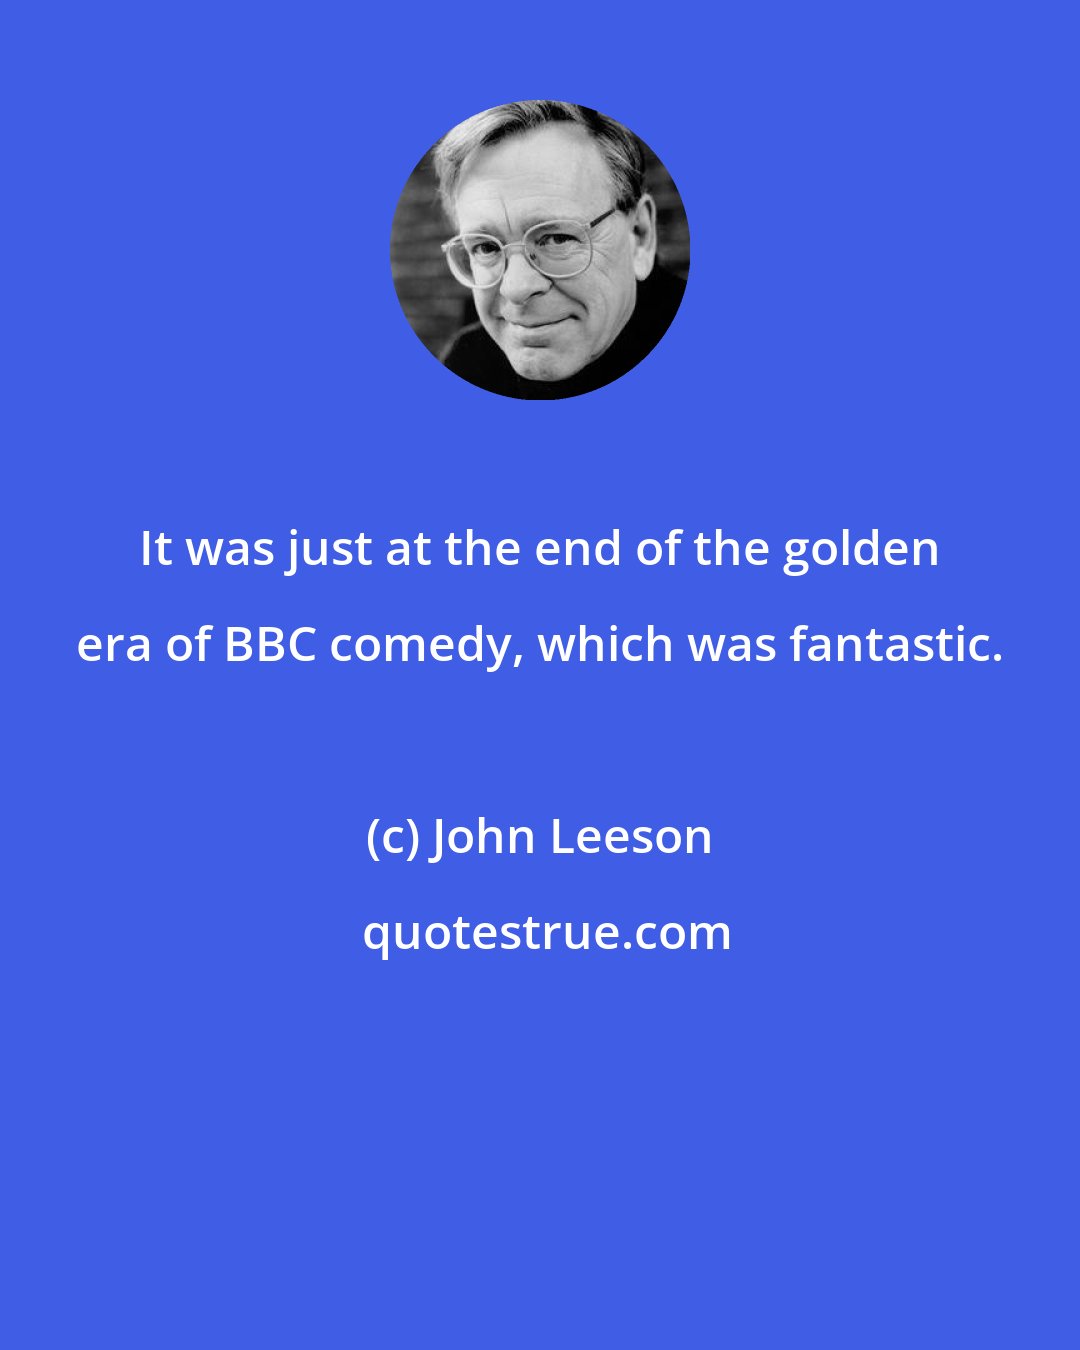 John Leeson: It was just at the end of the golden era of BBC comedy, which was fantastic.